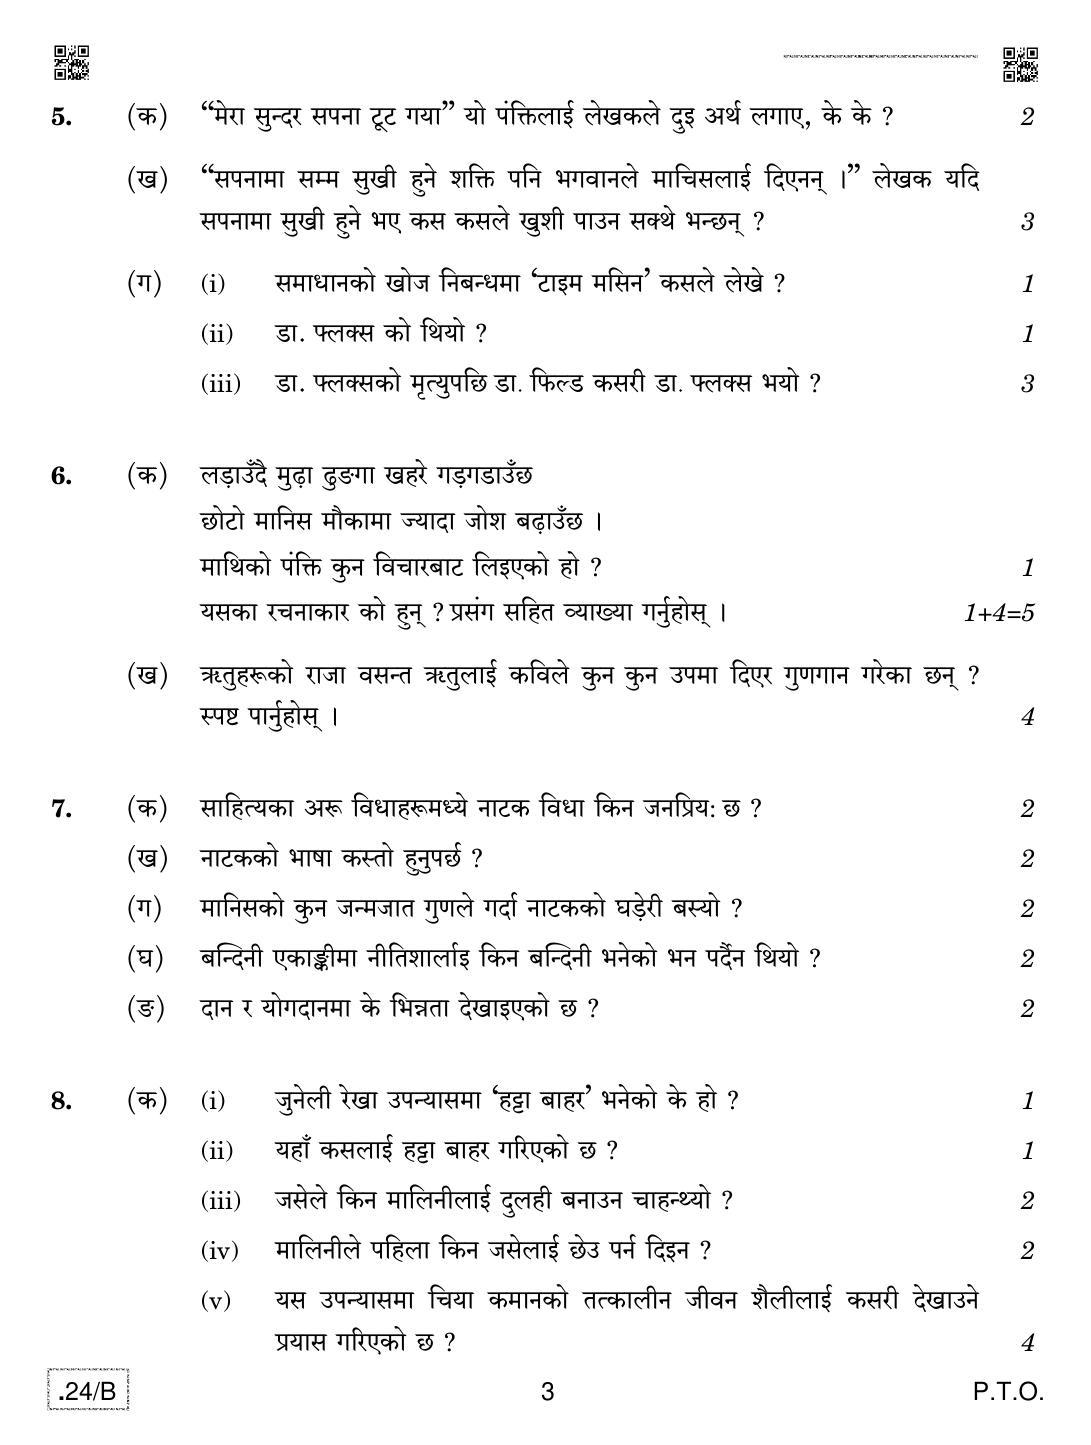 CBSE Class 12 Nepali 2020 Compartment Question Paper - Page 3